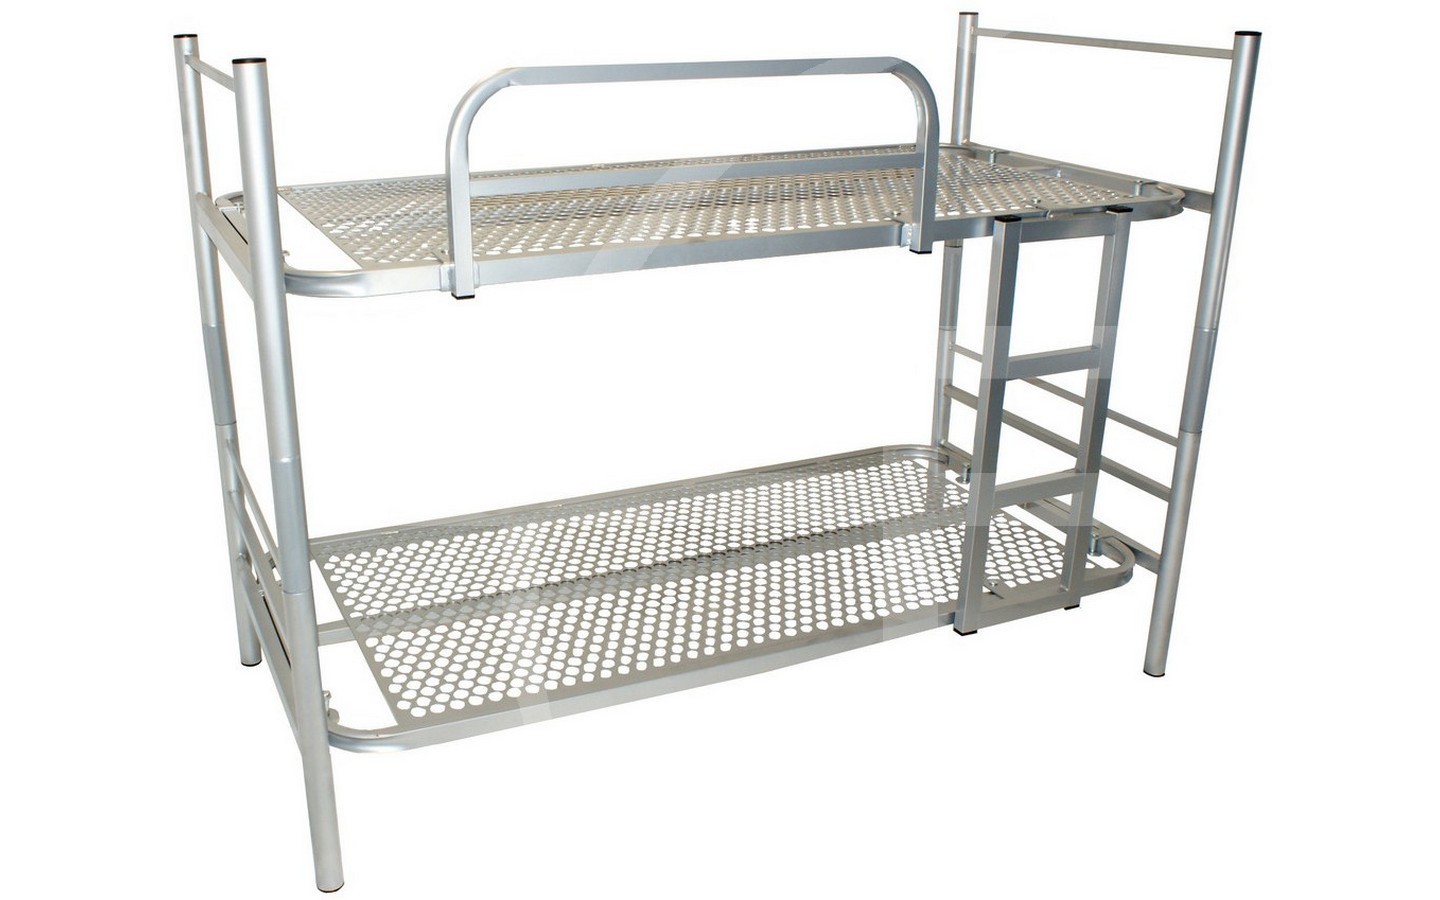 Bunk Beds For S Steel, Stainless Steel Bunk Bed